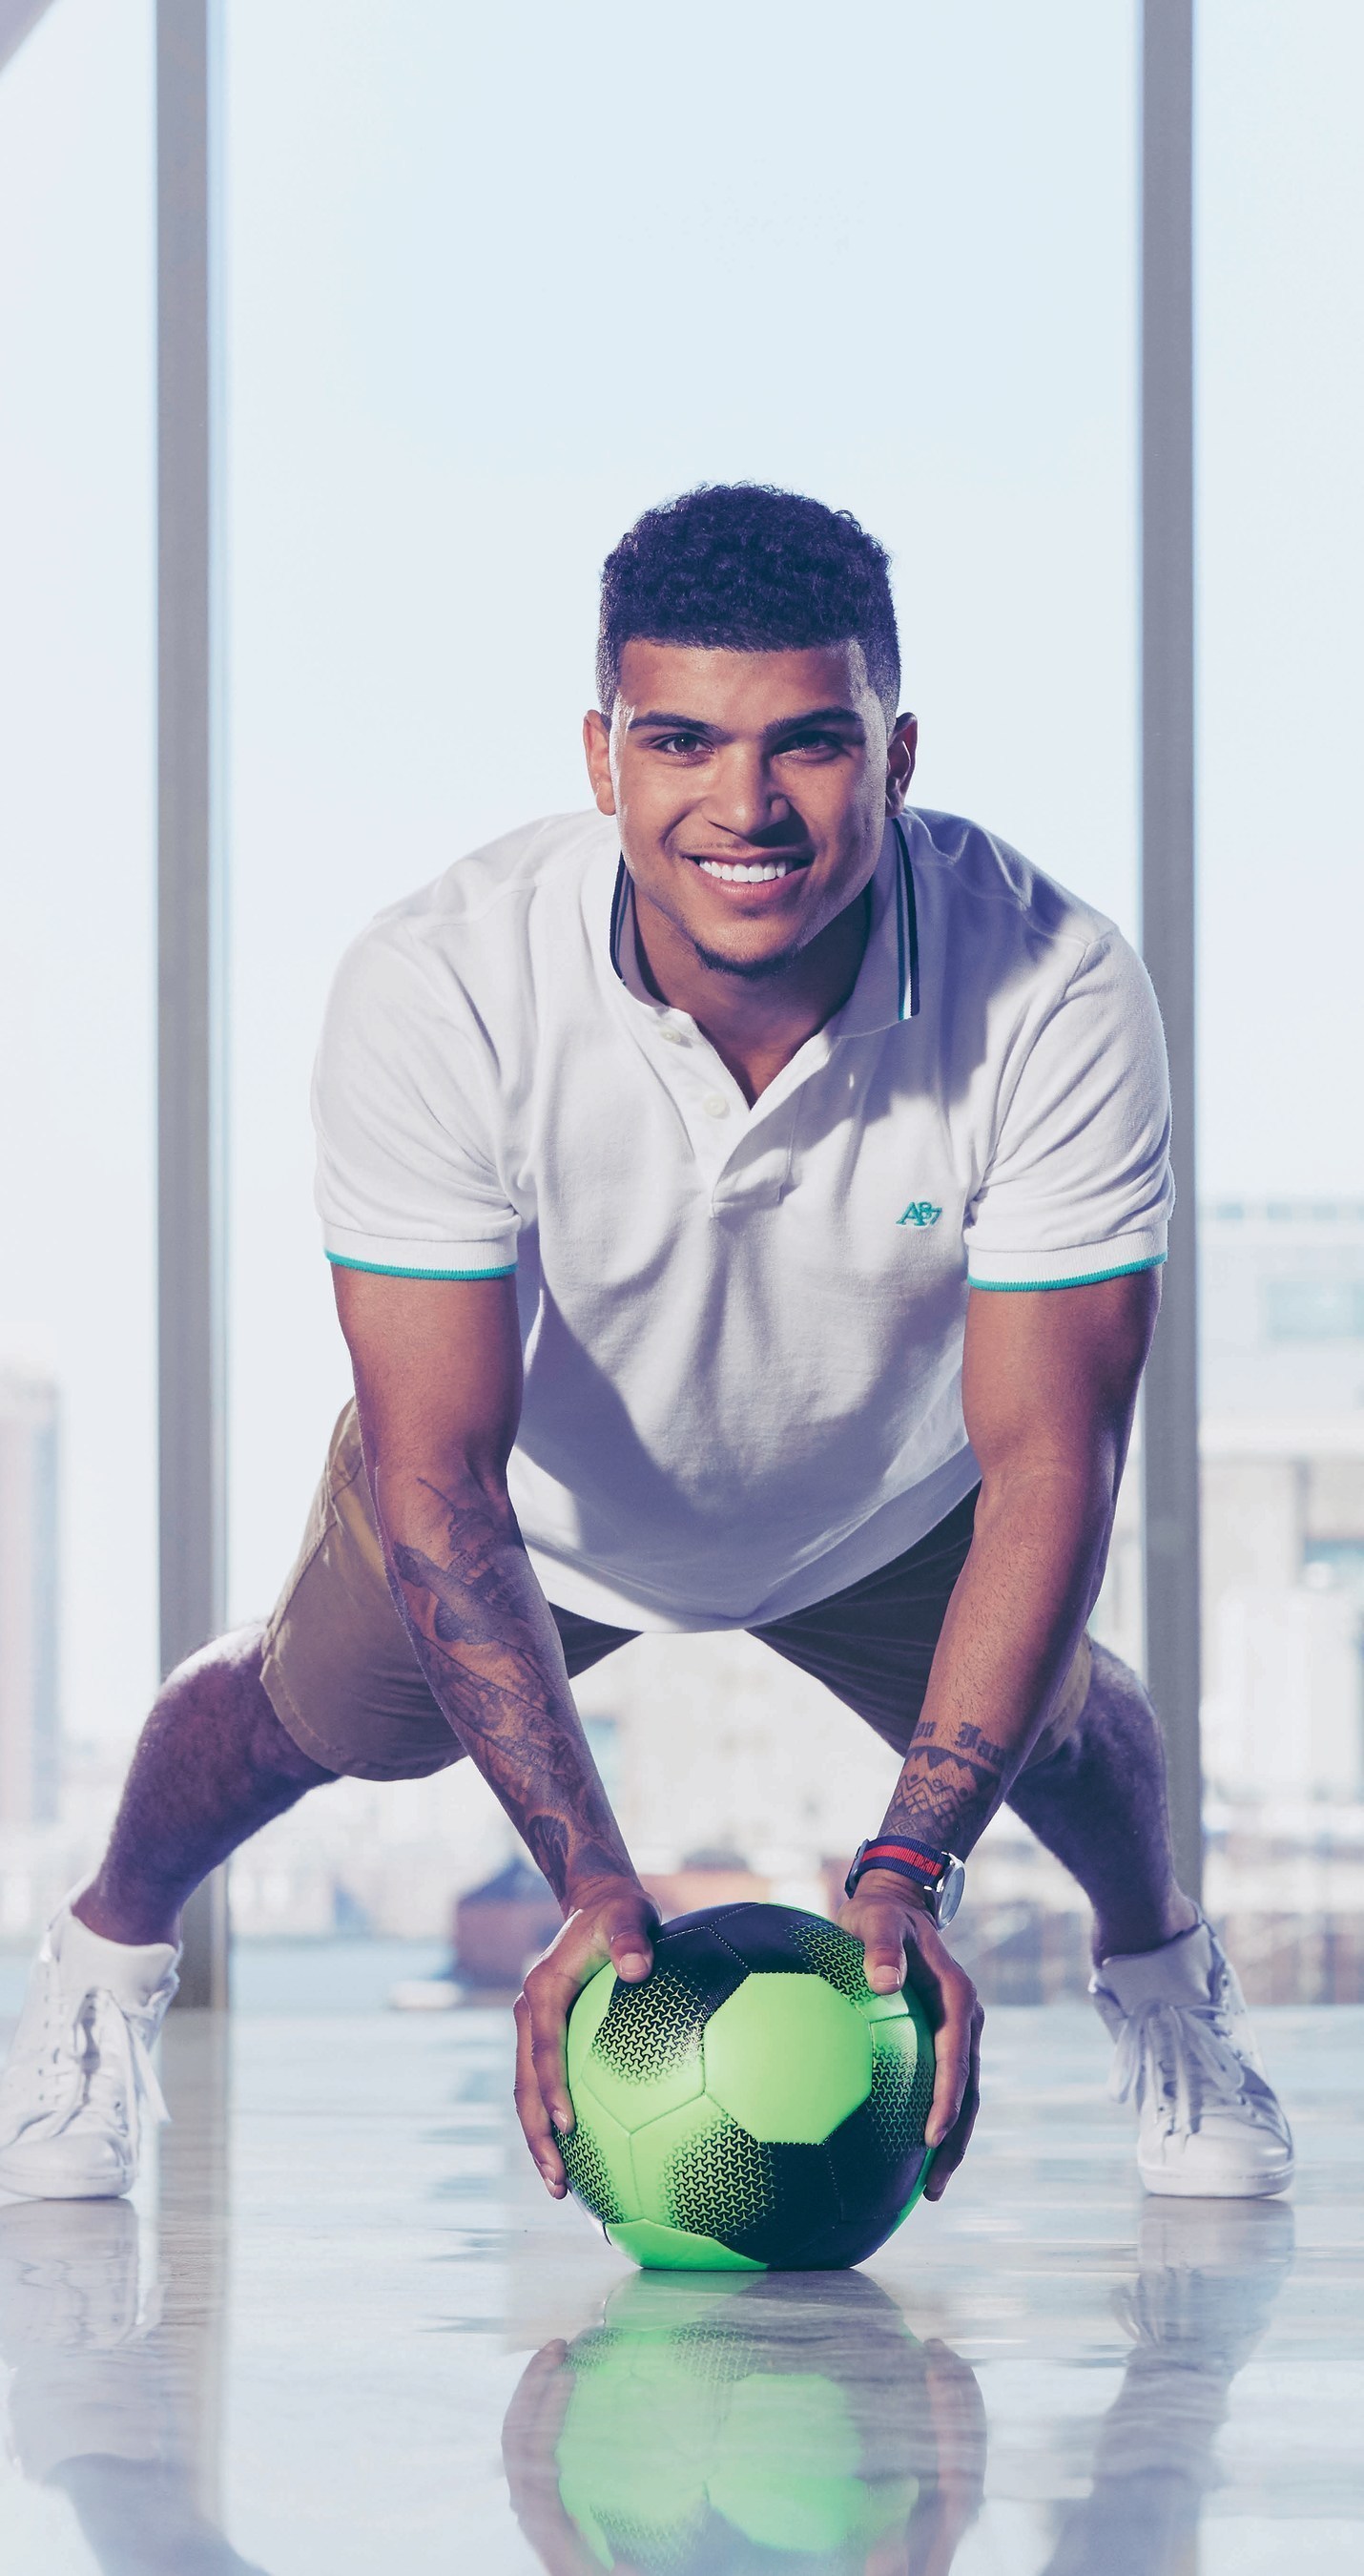 U.S. Men's Soccer Star, DeAndre Yedlin, partners with Aeropostale on their new campaign.